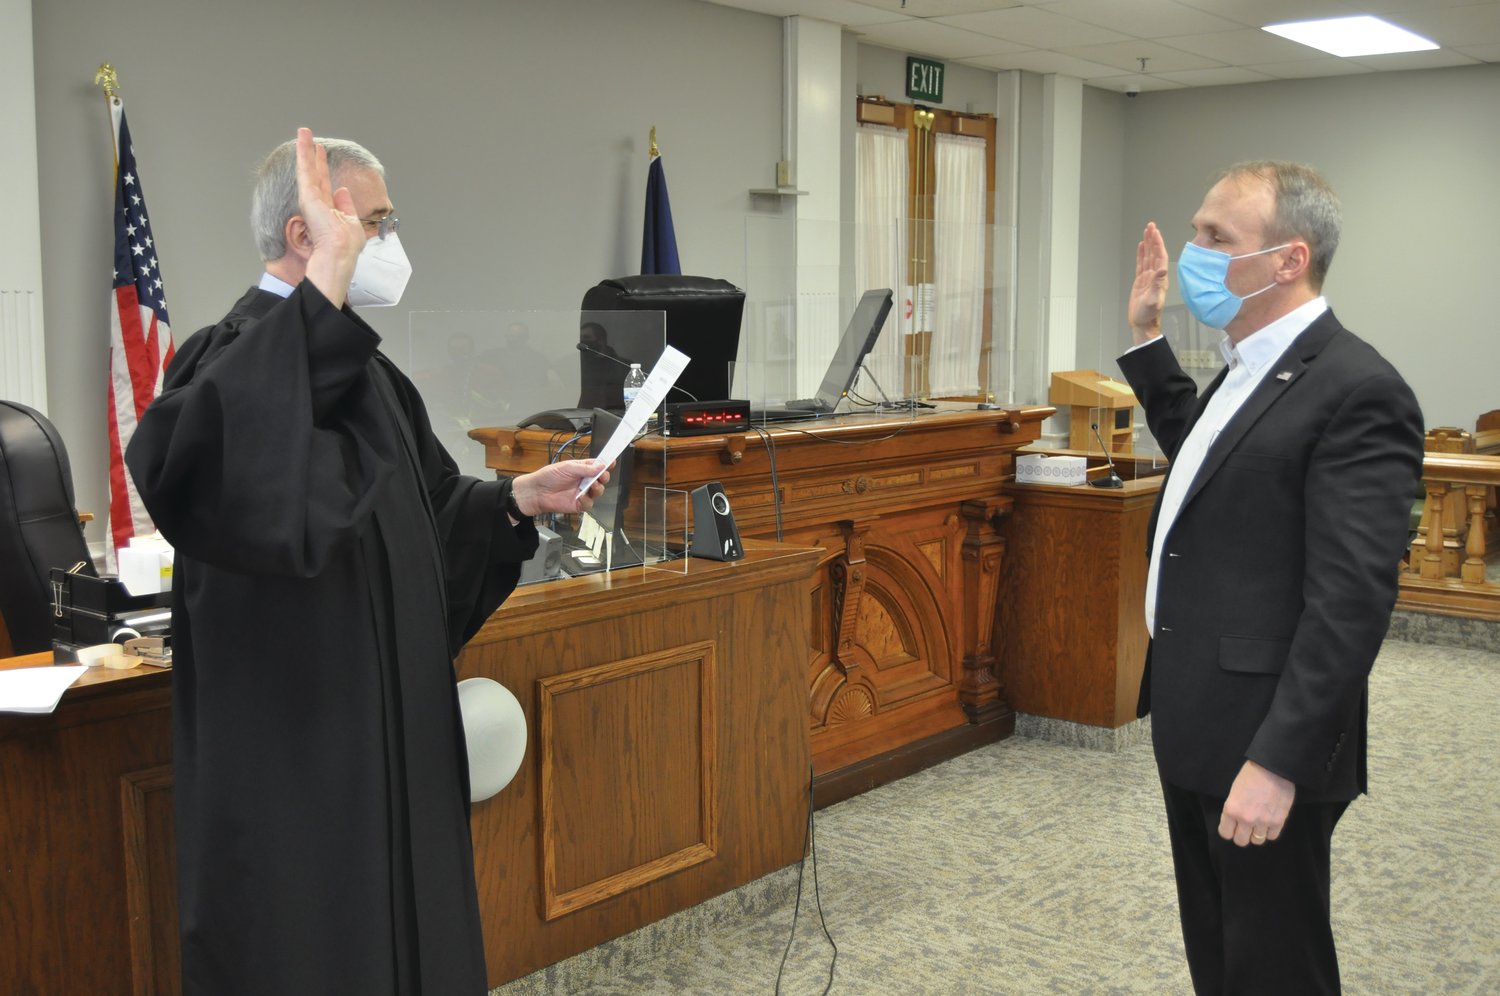 Montgomery County Councilman David Hunt takes the oath of office from Judge Harry Siamas in the circuit courtroom Tuesday.